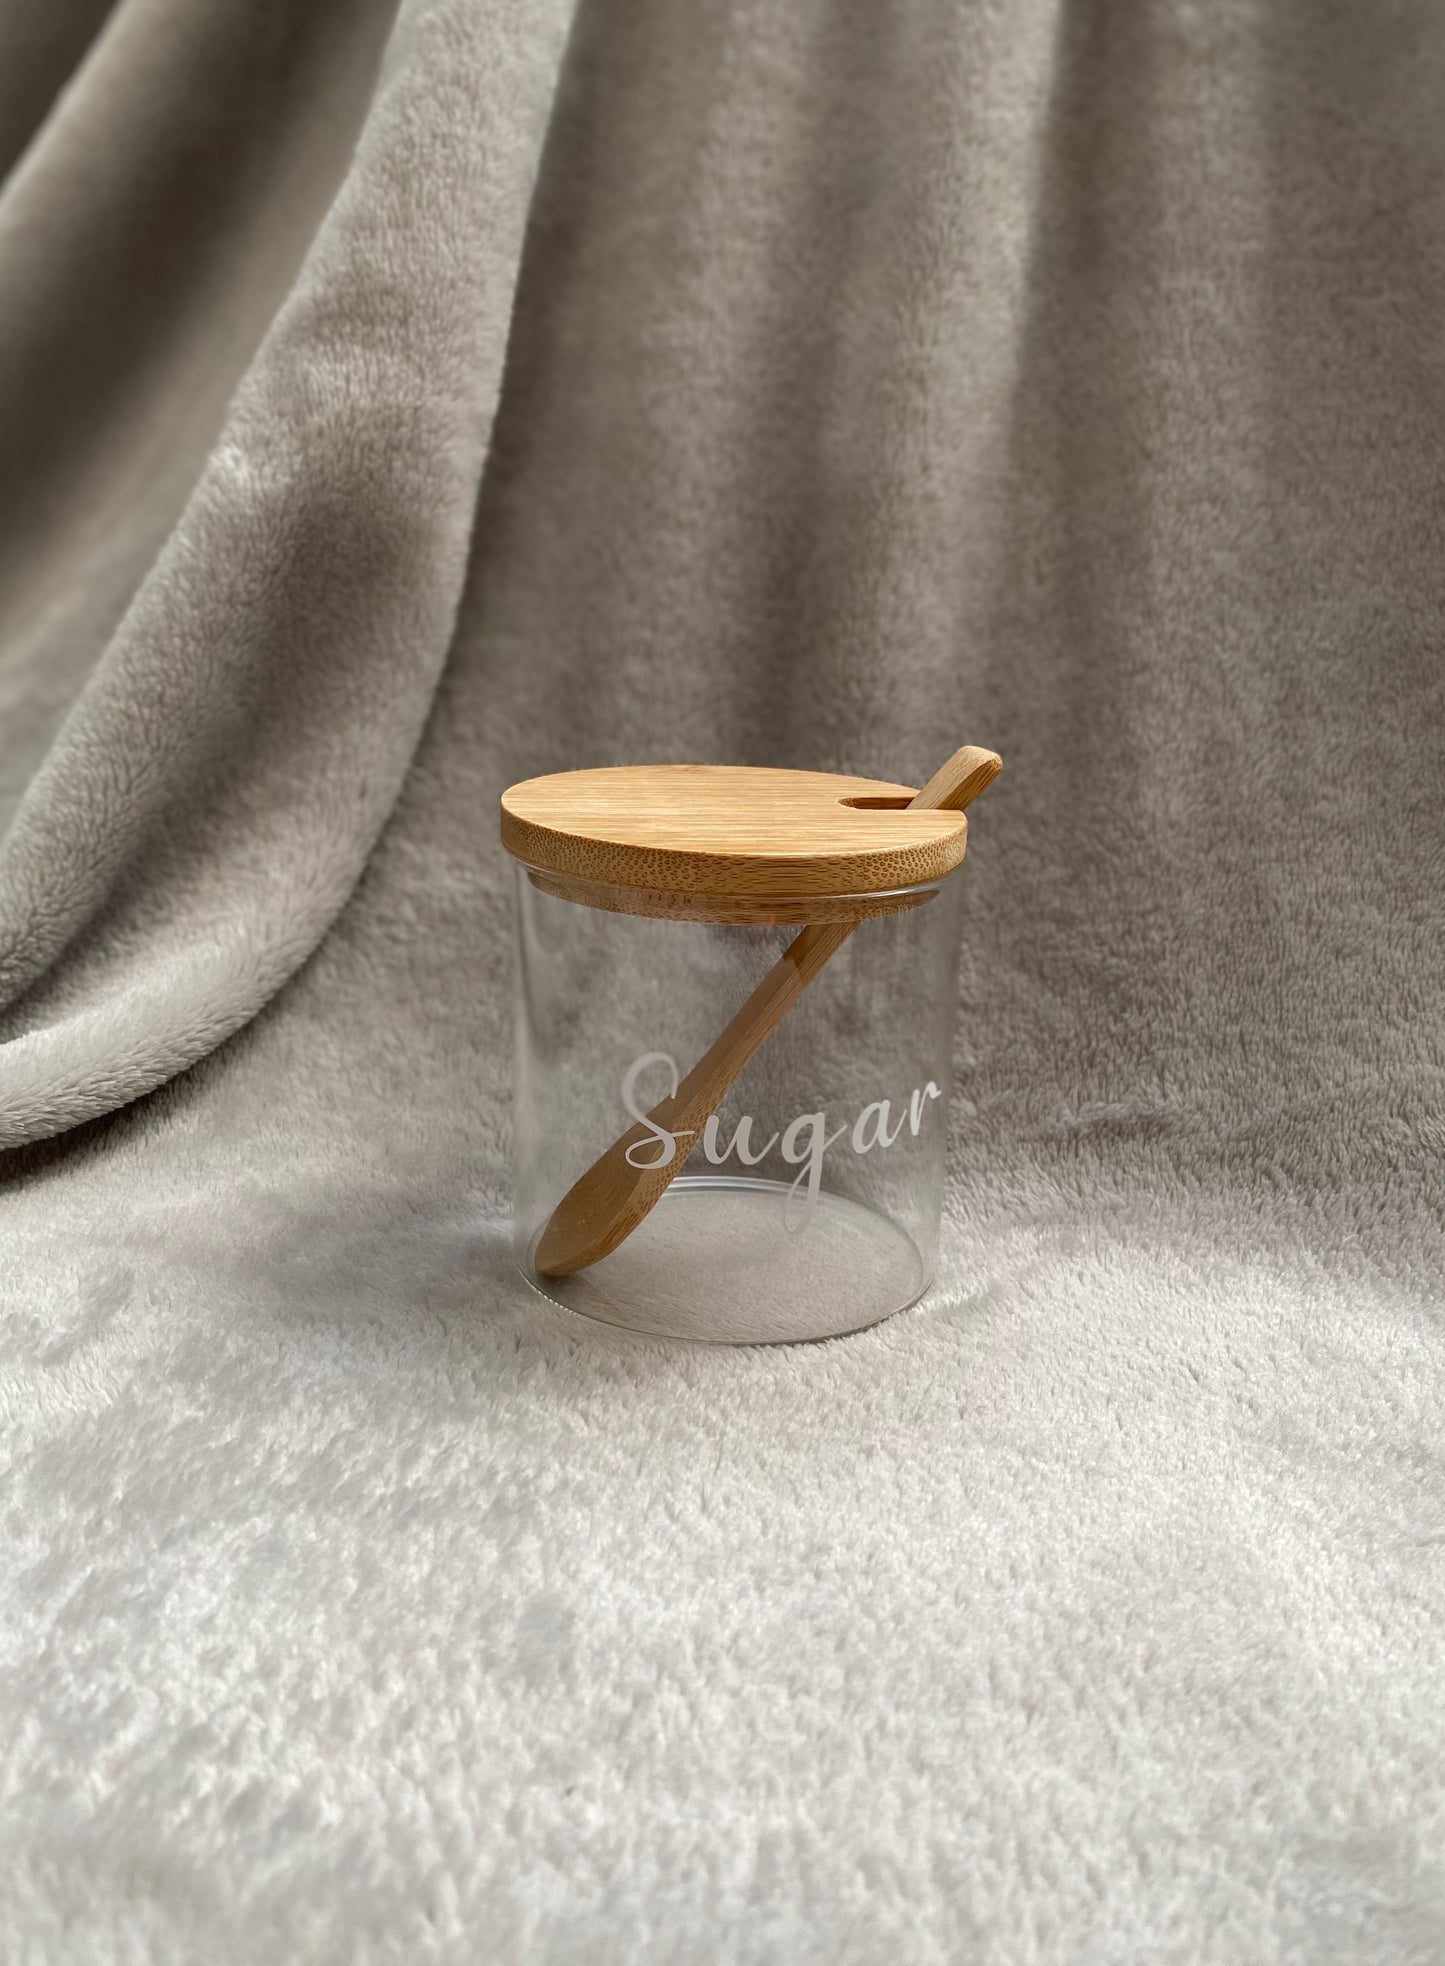 Jar with bamboo lid/spoon